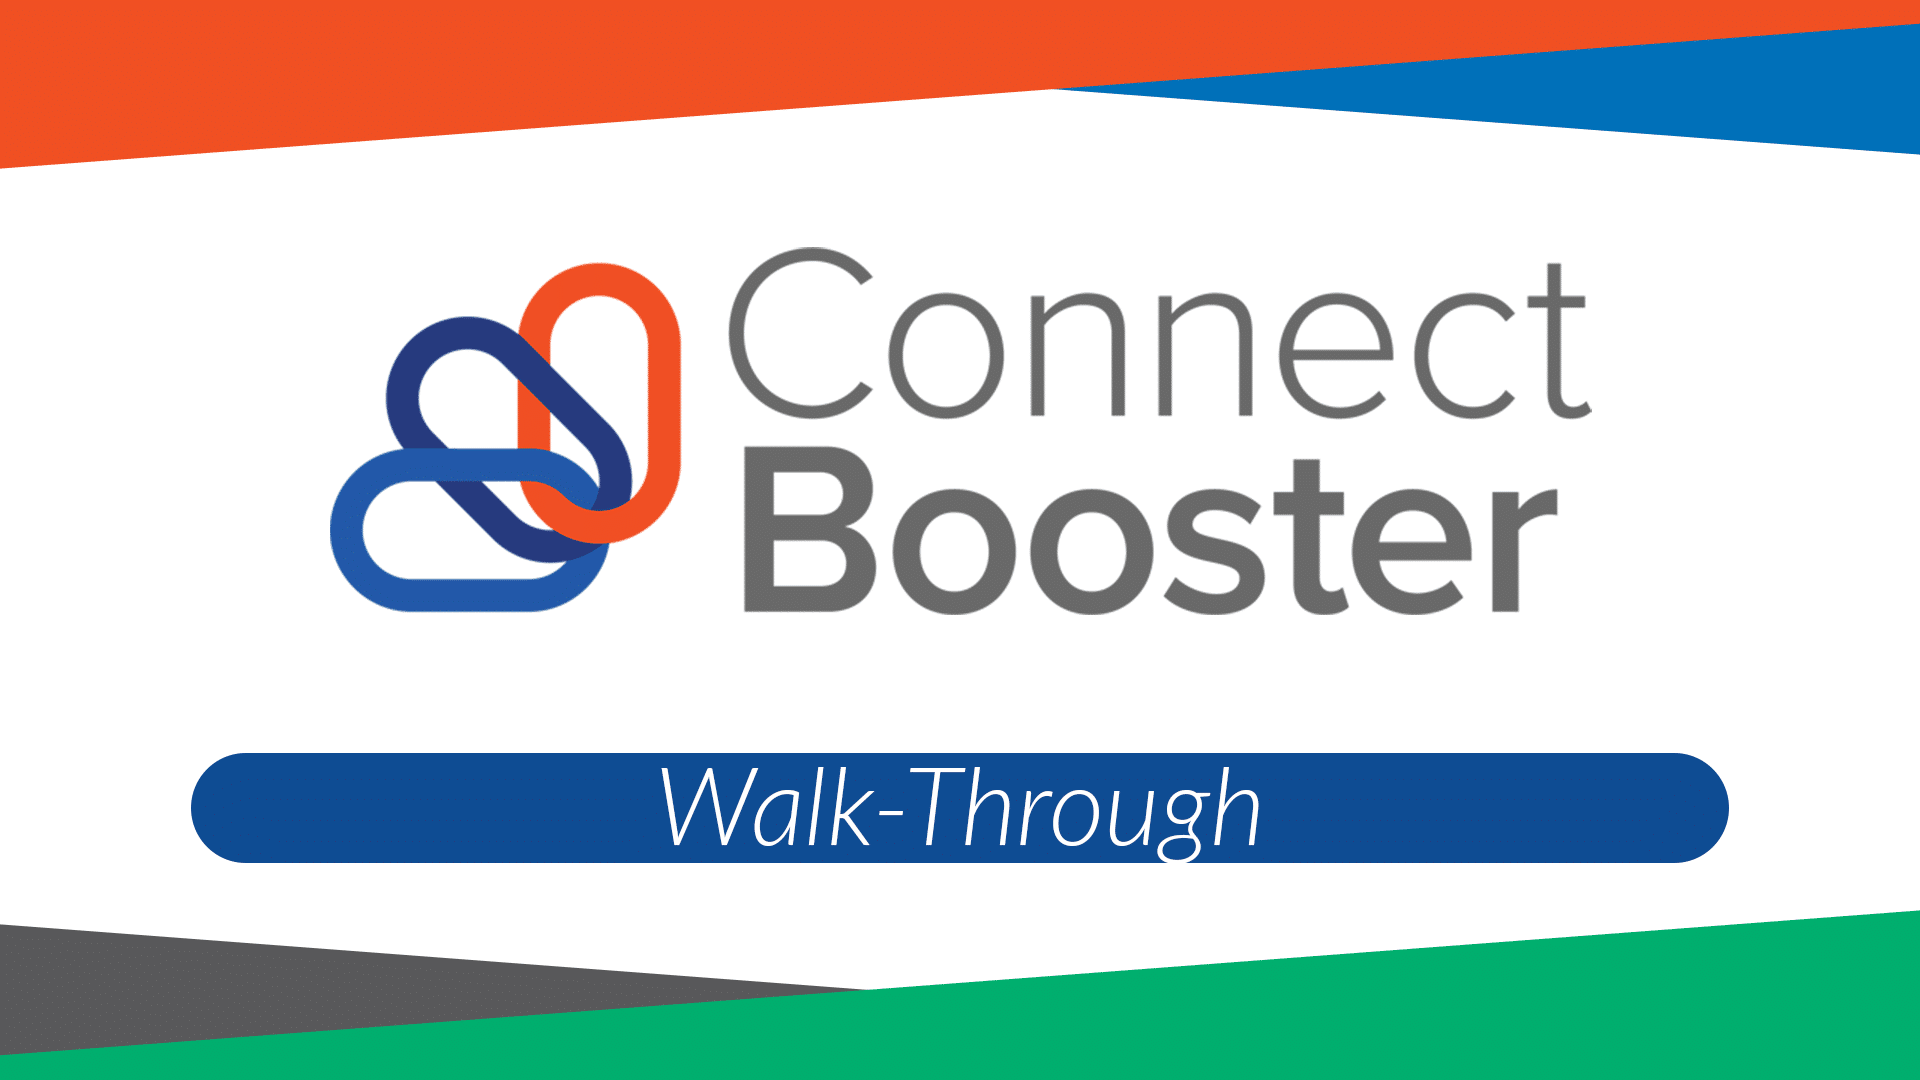 ConnectBooster Walk-through | Grow Your Business with an Automated Payments Portal